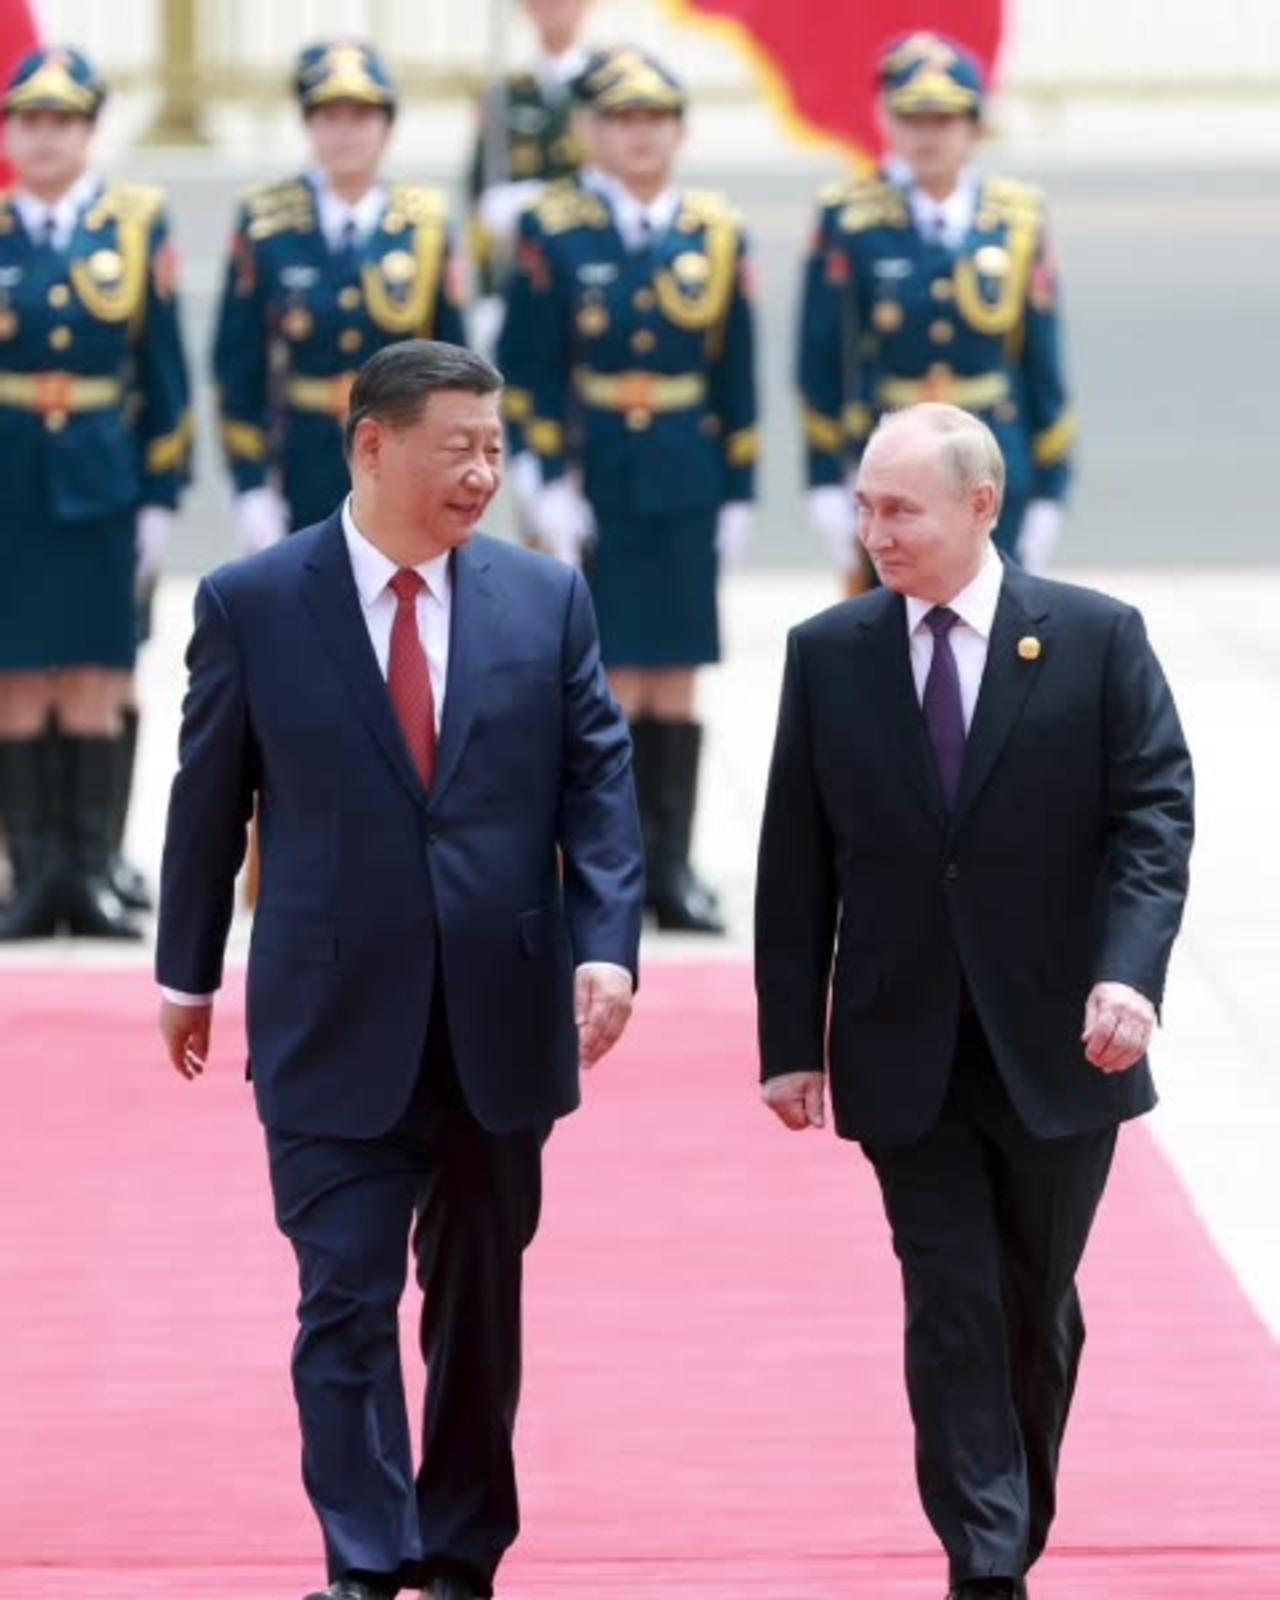 China & Russia expect to share common prosperity against western hegemony